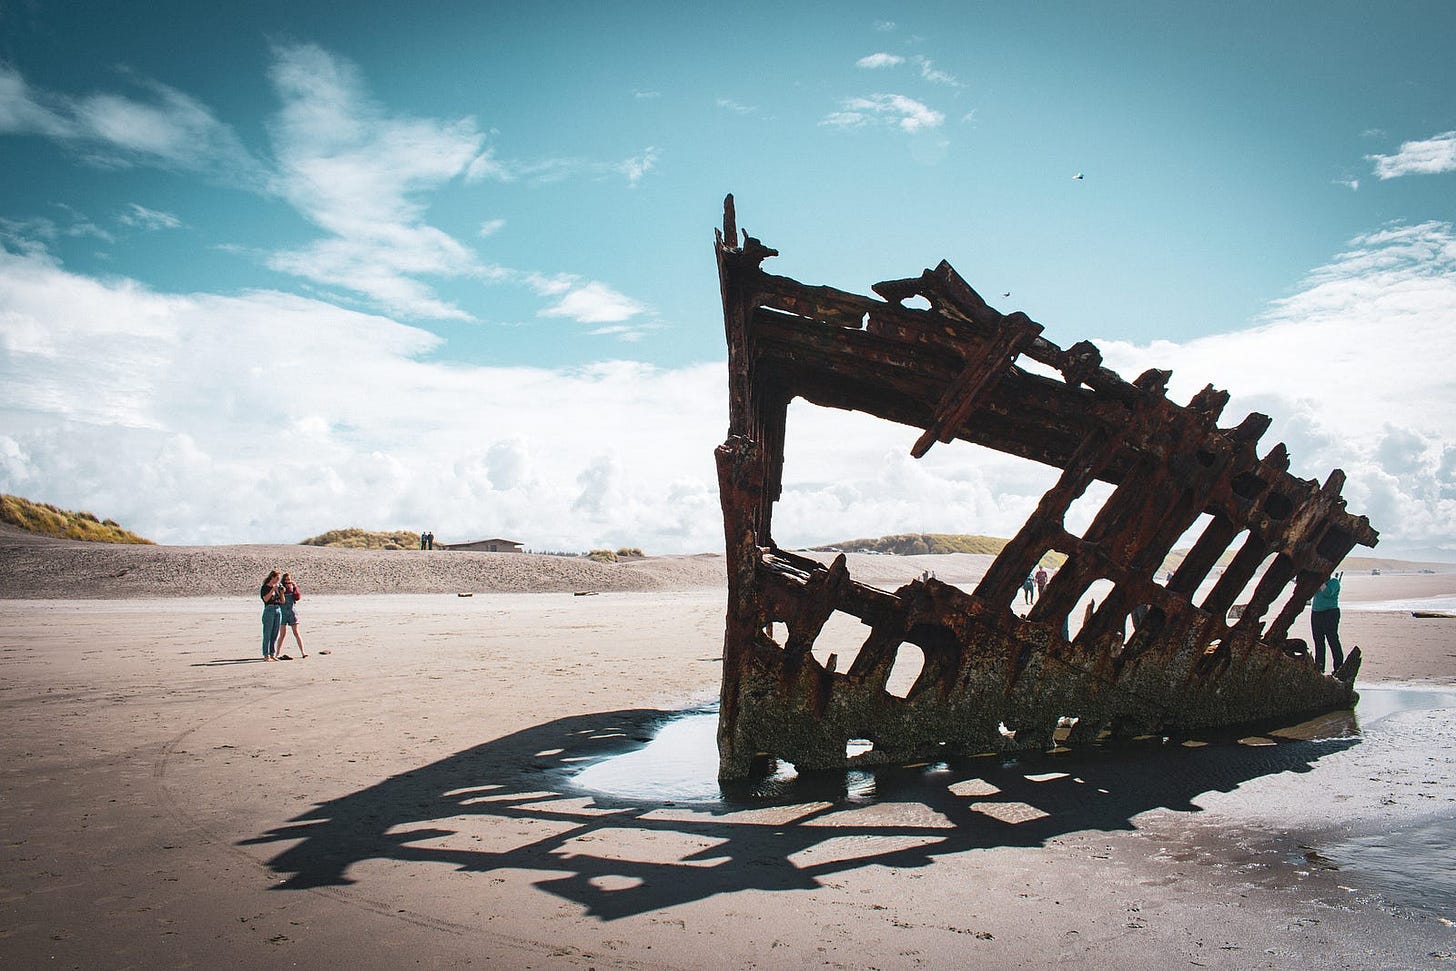 old shipwreck washed up on a beach with people looking at it